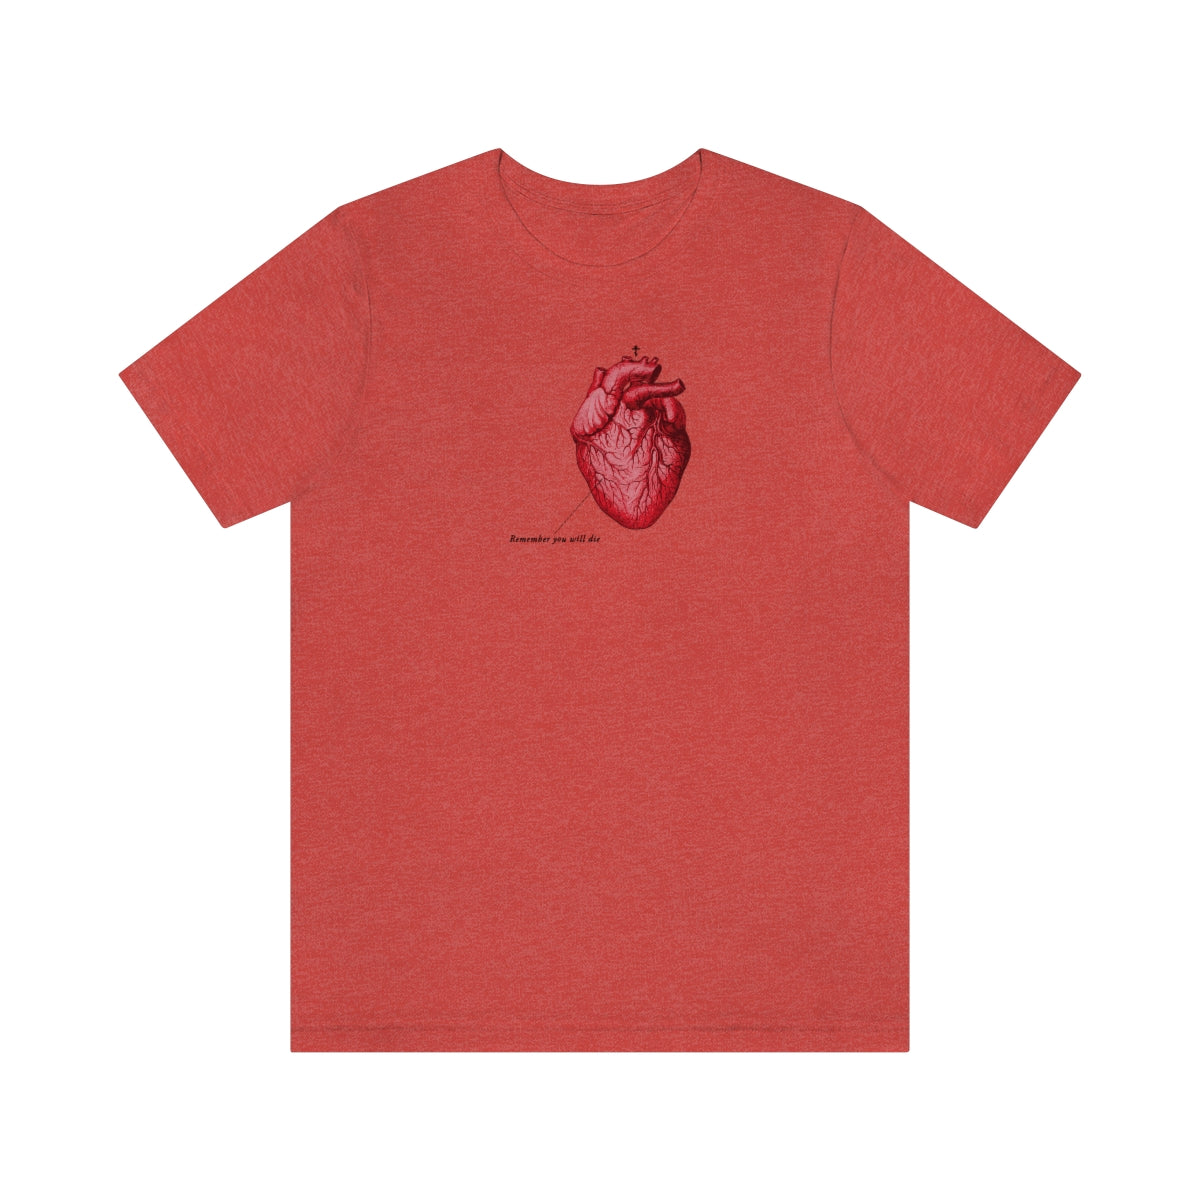 Remember You Will Die Heart Design No. 1 | Orthodox Christian T-Shirt